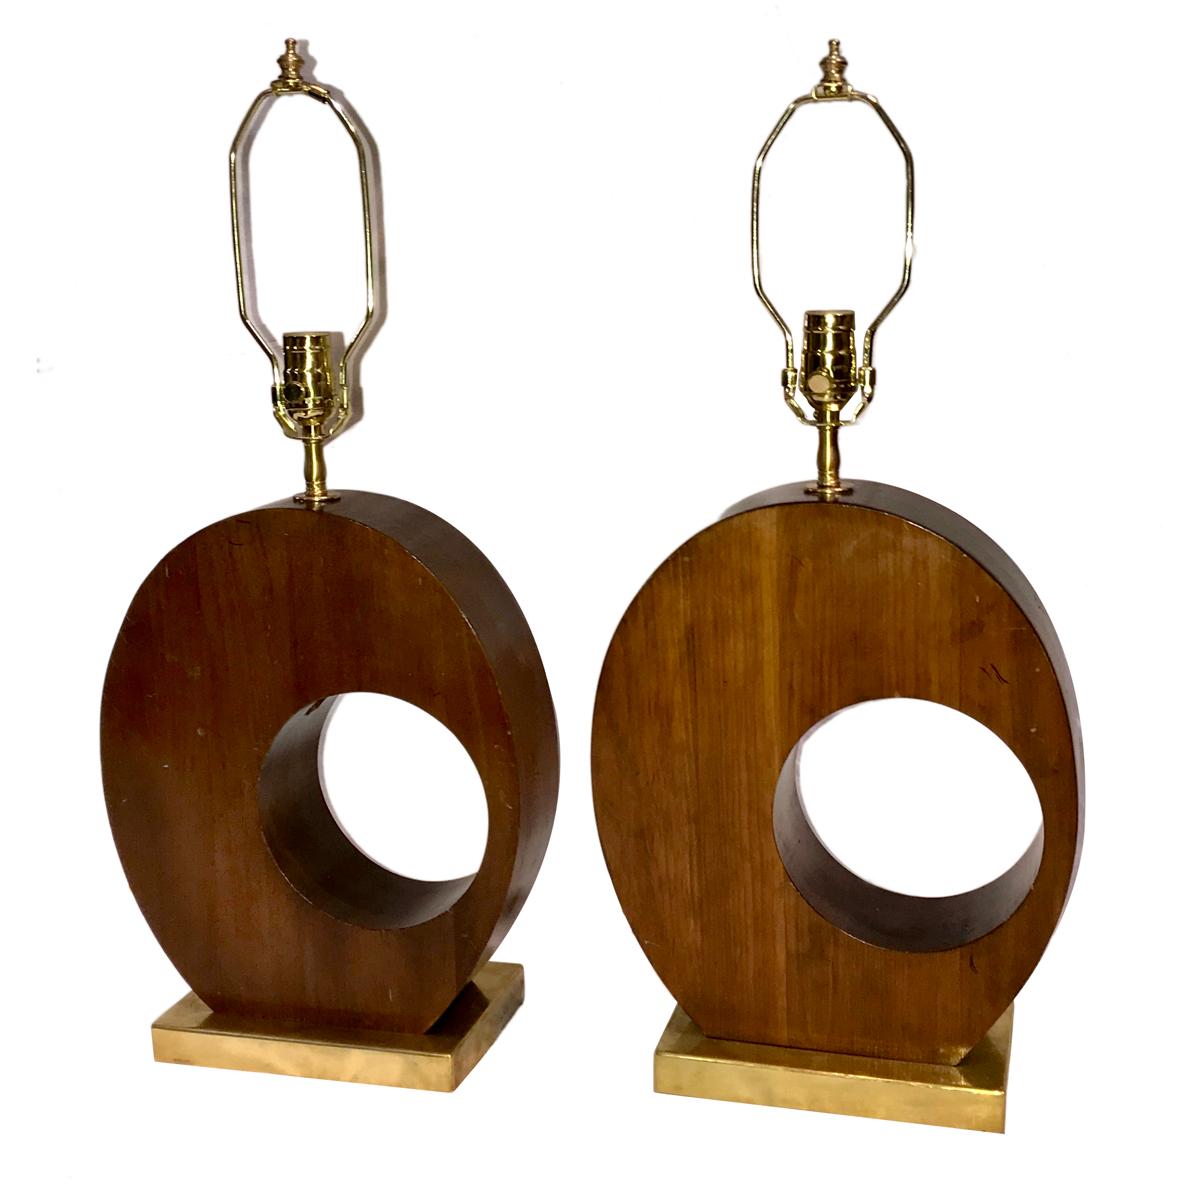 A pair of circa 1950s French Moderne carved wood sculptural lamps with gilt bases.

Measurements:
Height 15